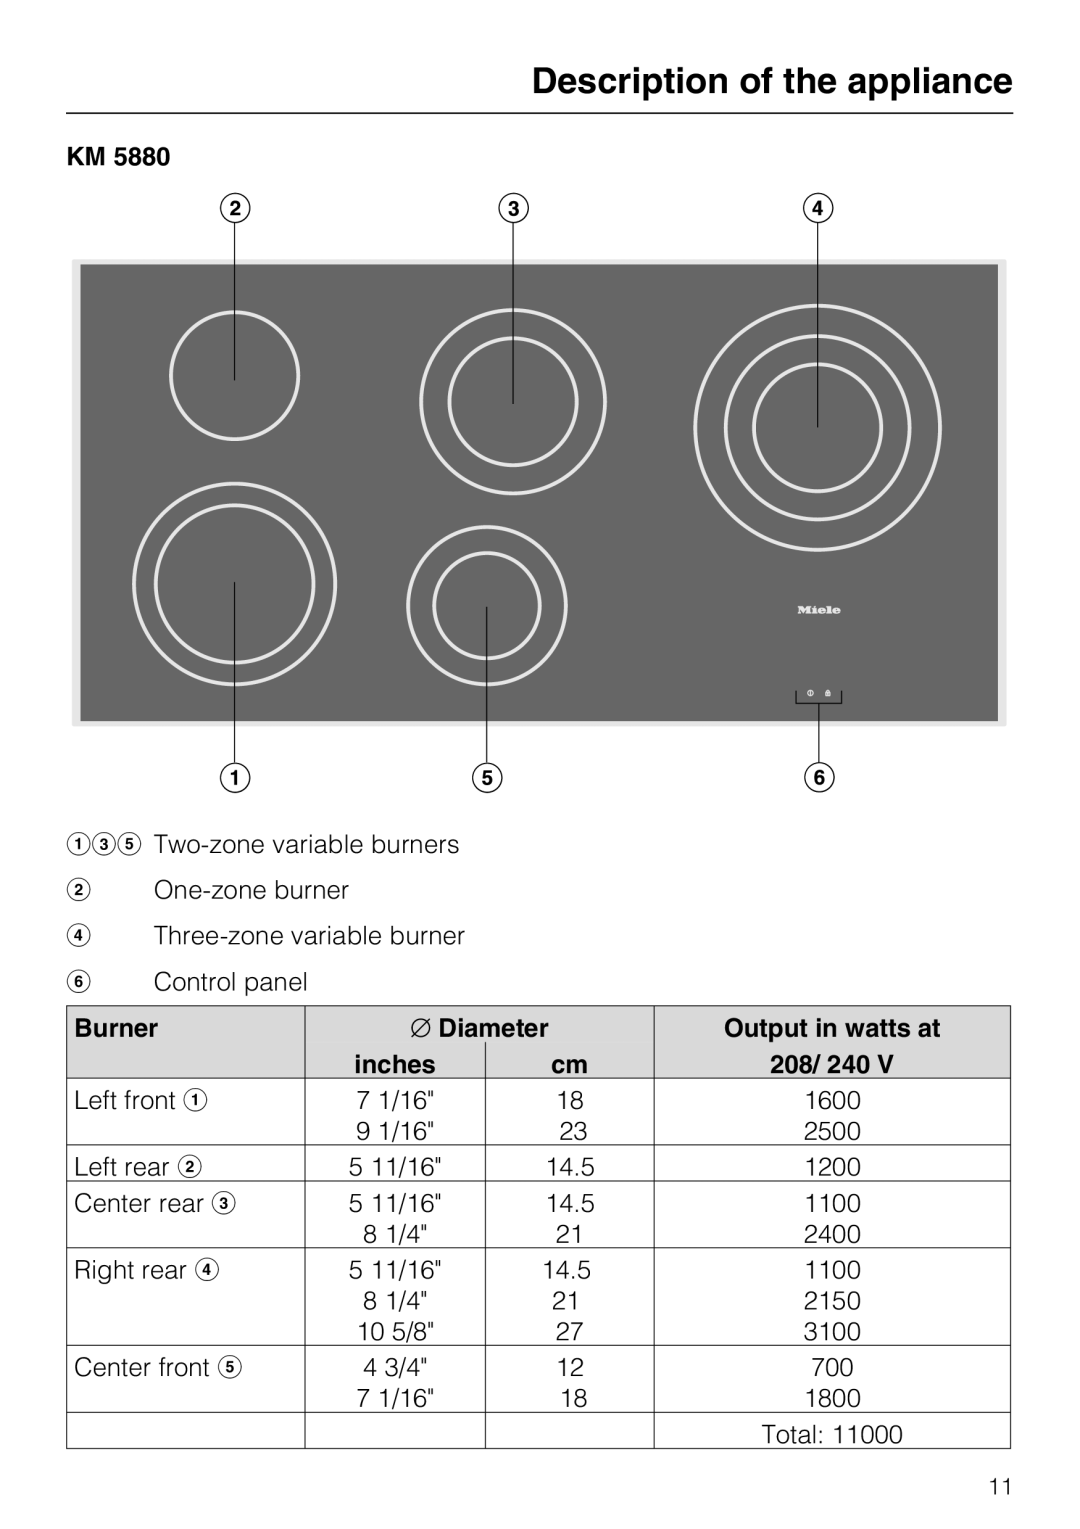 Miele KM 5840, KM 5860, KM 5880 208, Description of the appliance, Burner, Diameter, Output in watts at, inches 